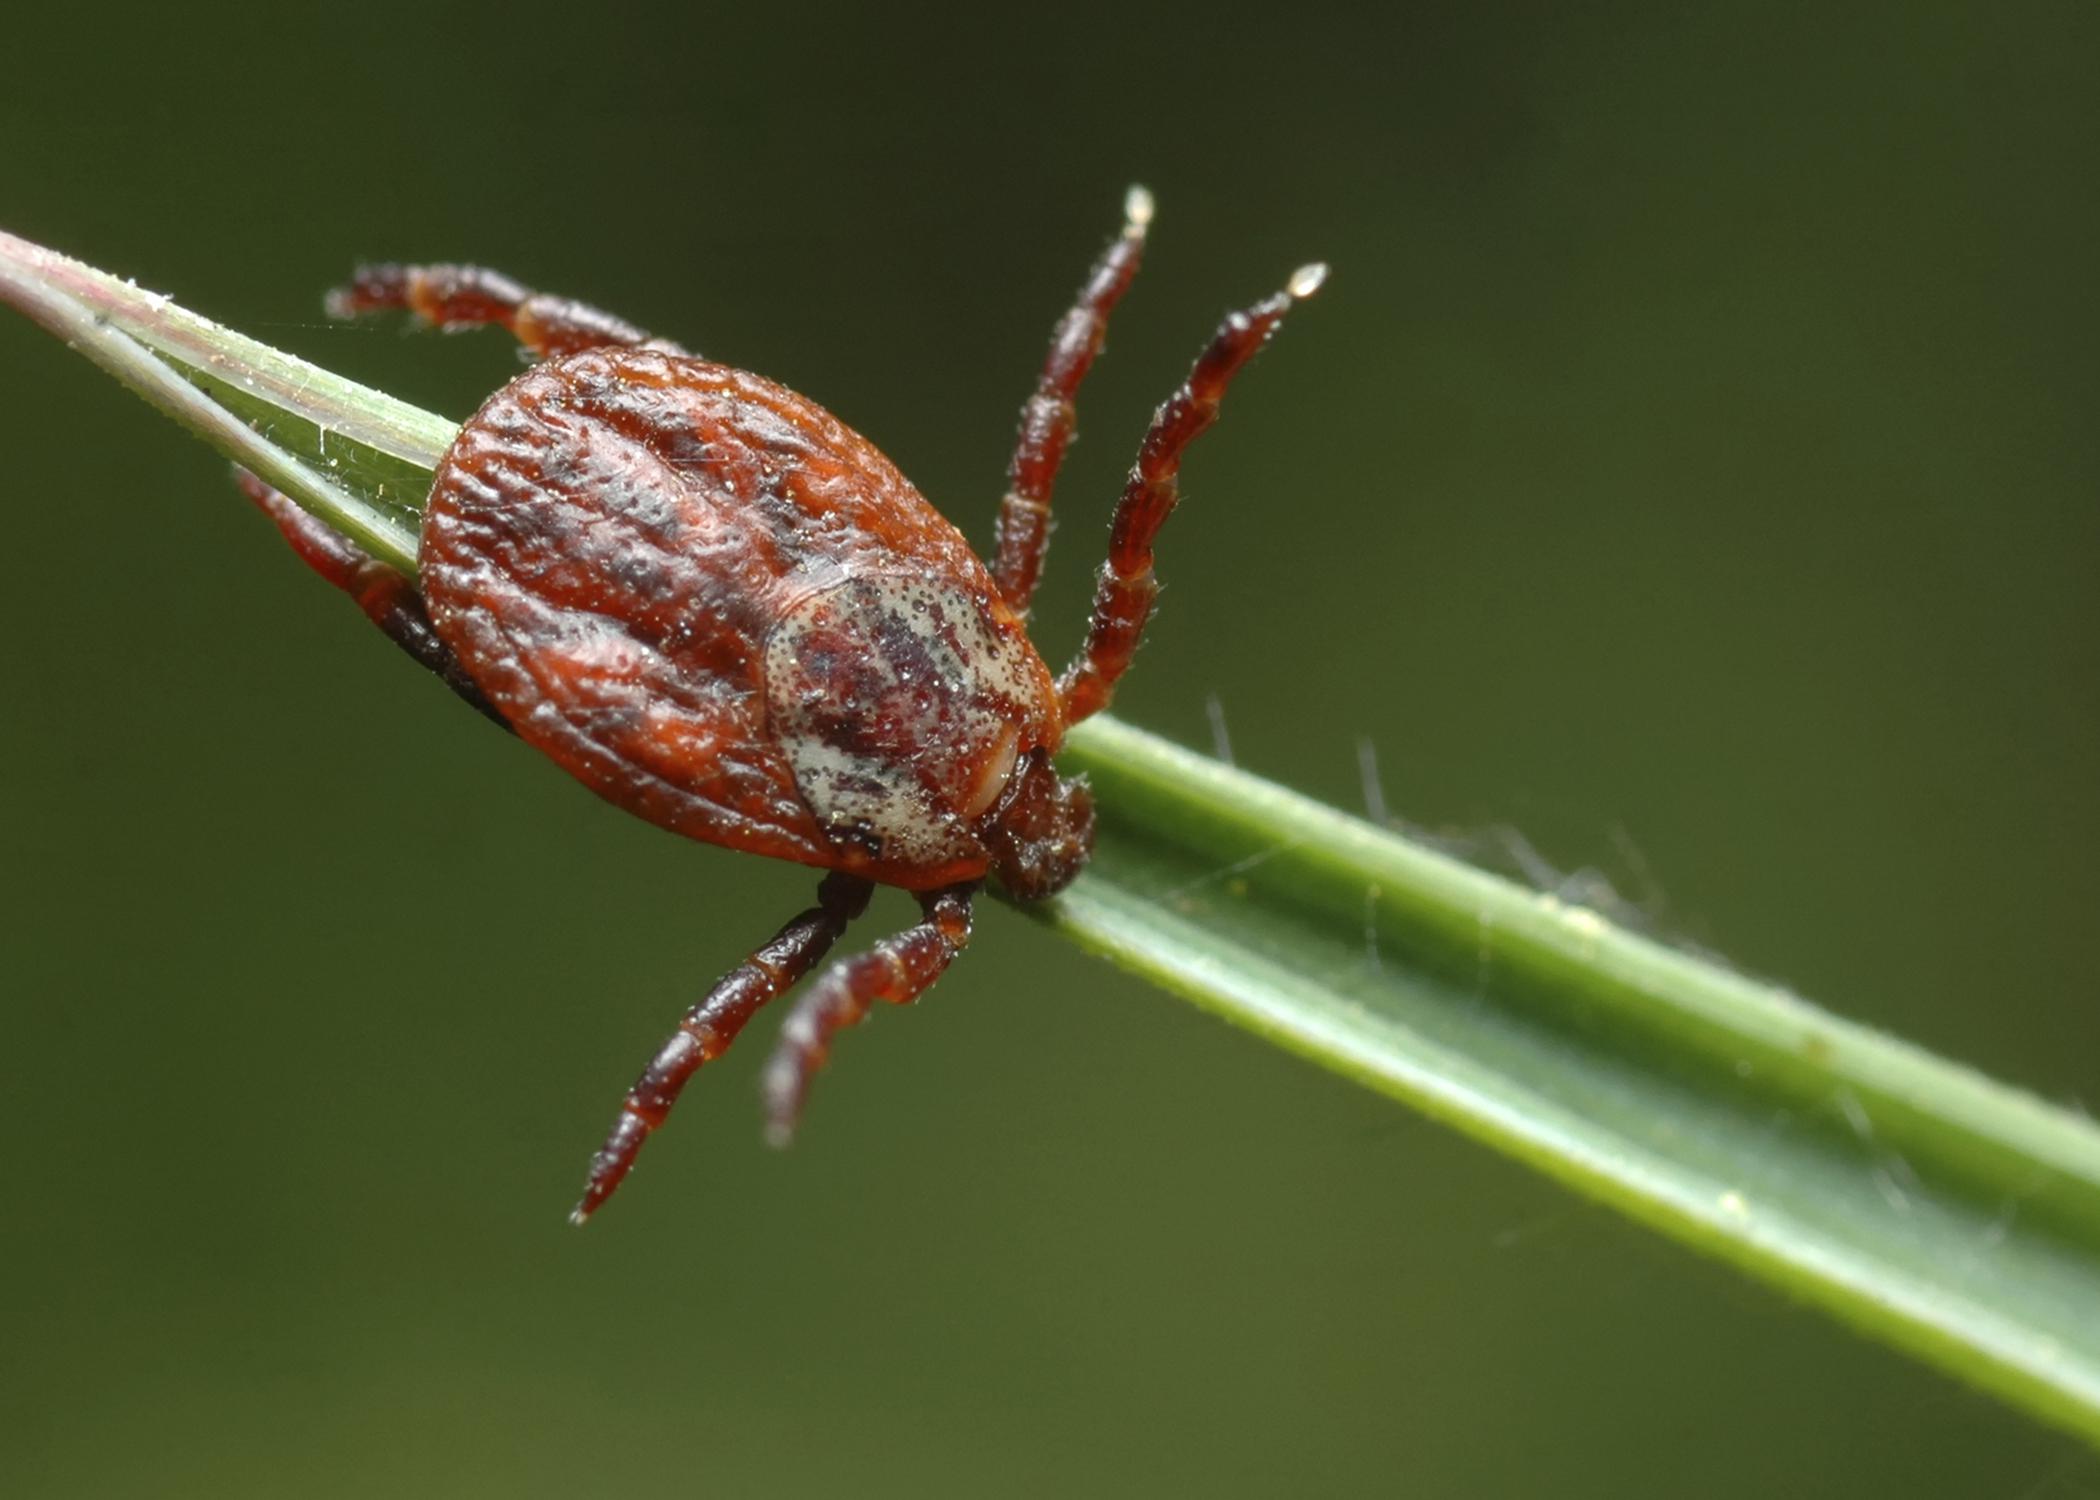 The Dermacentor tick species is among those that infect dogs with a neurotoxin that can paralyze them if left untreated. (Photo by Thinkstock.)